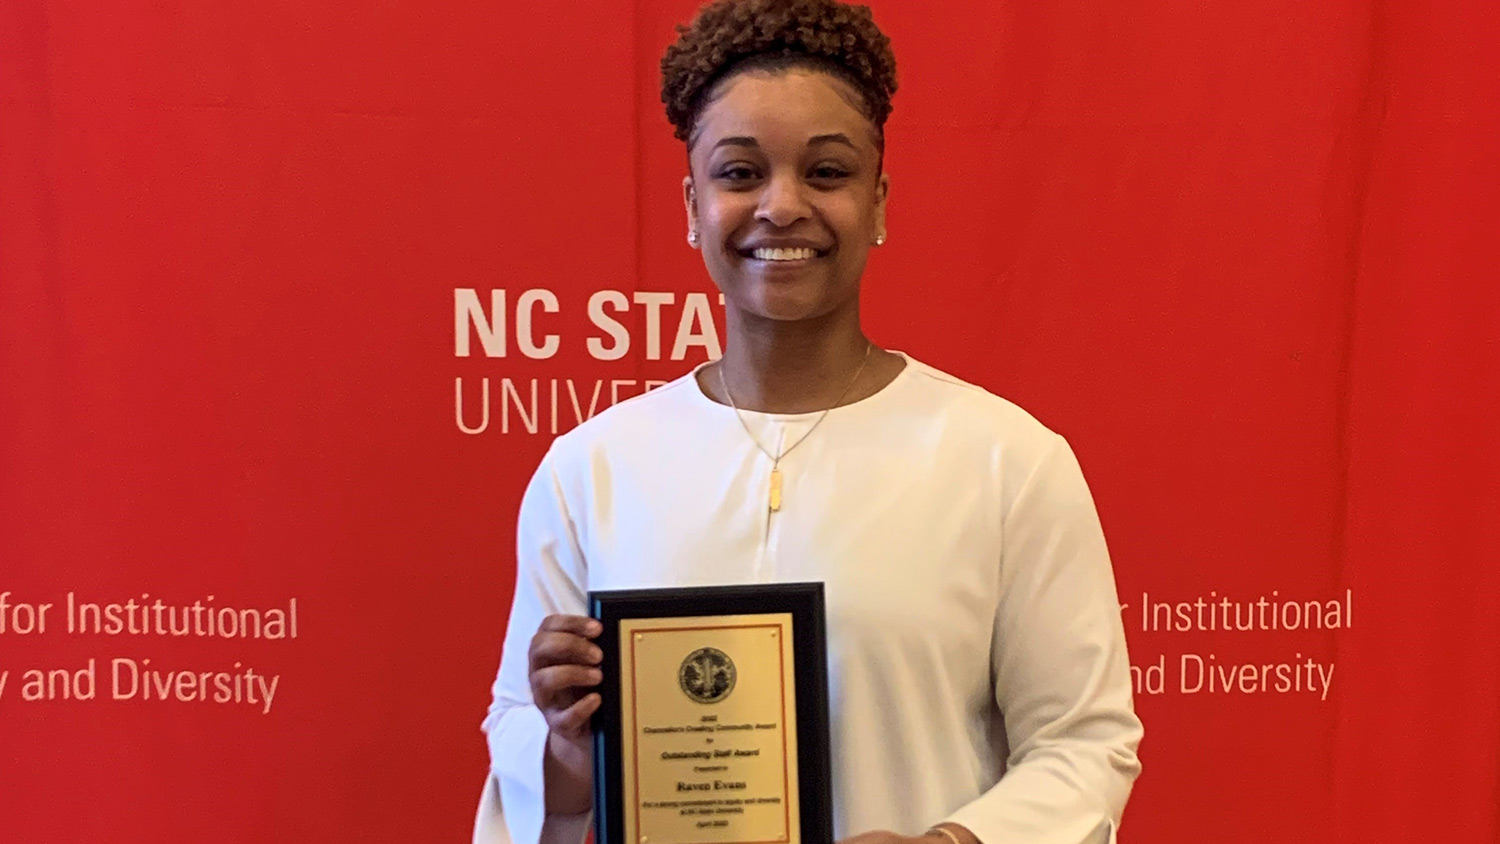 NC State staff member Raven Evans recently won the Office of Finance and Administration’s Award for Excellence in Human Relations and the Chancellor’s Creating Community Award for Outstanding Staff.